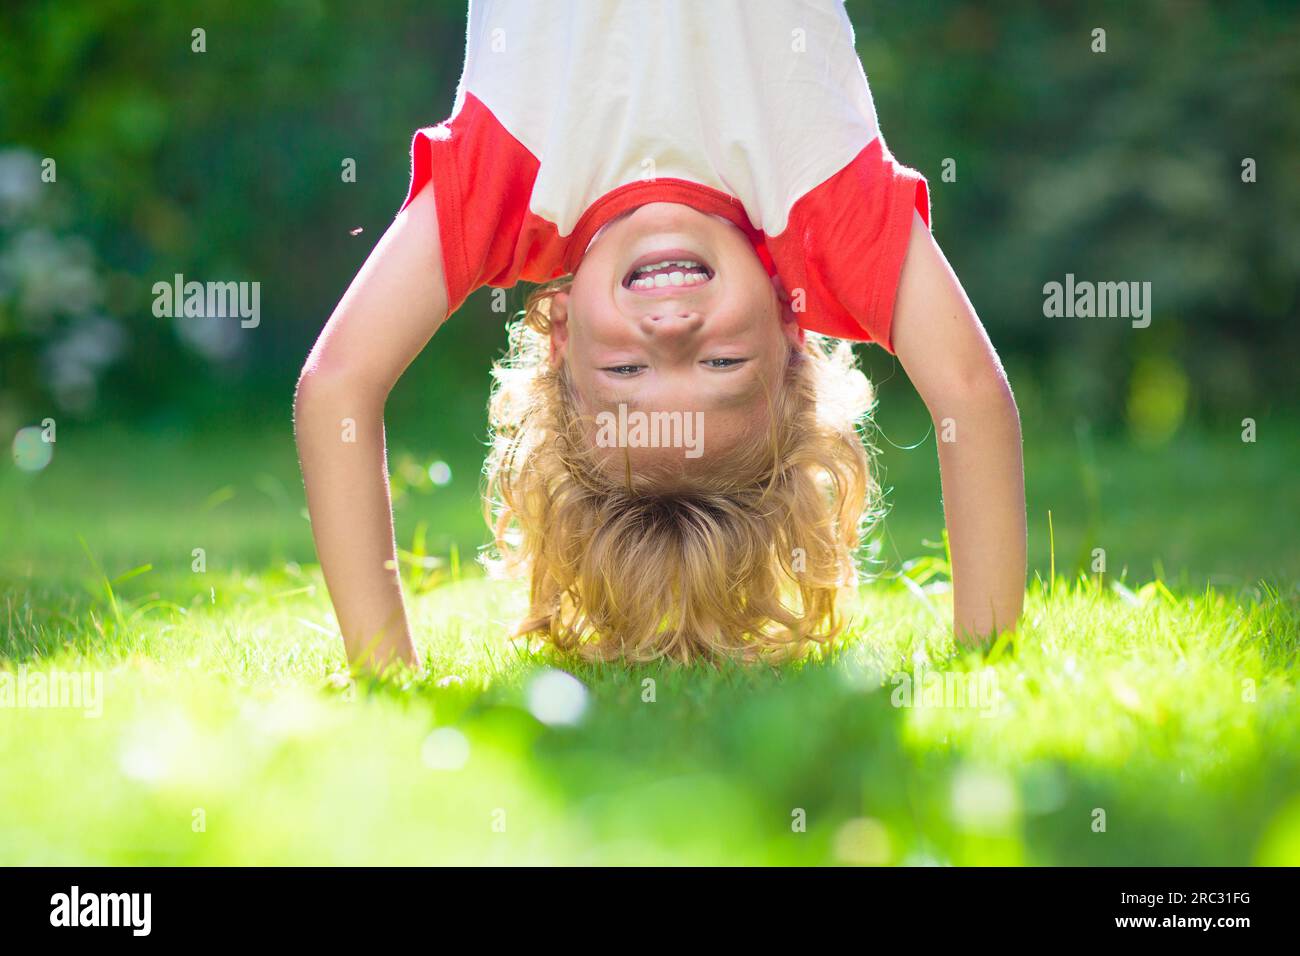 Young girl child playing in garden hanging upside down, MR#543